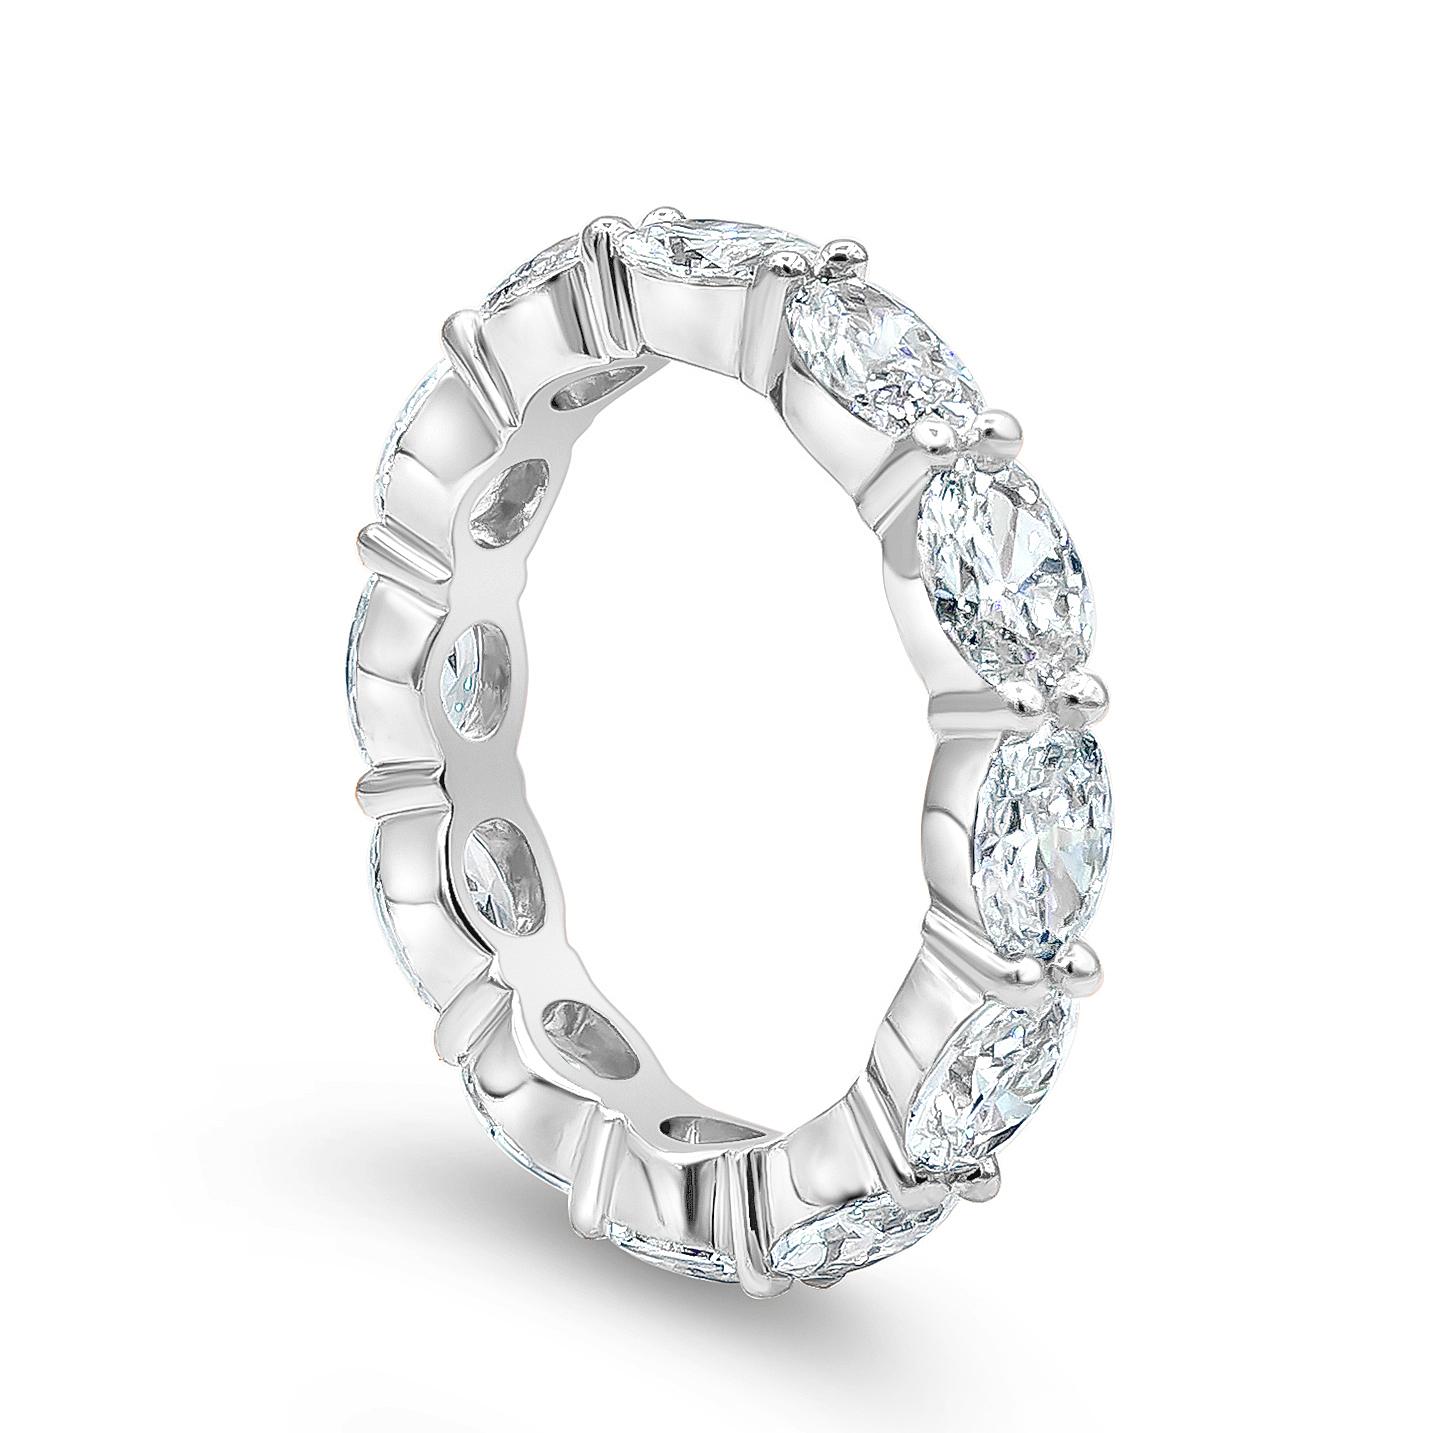 This chic eternity wedding band ring features 13 brilliant oval shaped diamonds weighing 2.82 carats total. The oval diamonds are set horizontally and the stones are matched perfectly. Set in a shared-prong setting, Made with Platinum. Size 6.25